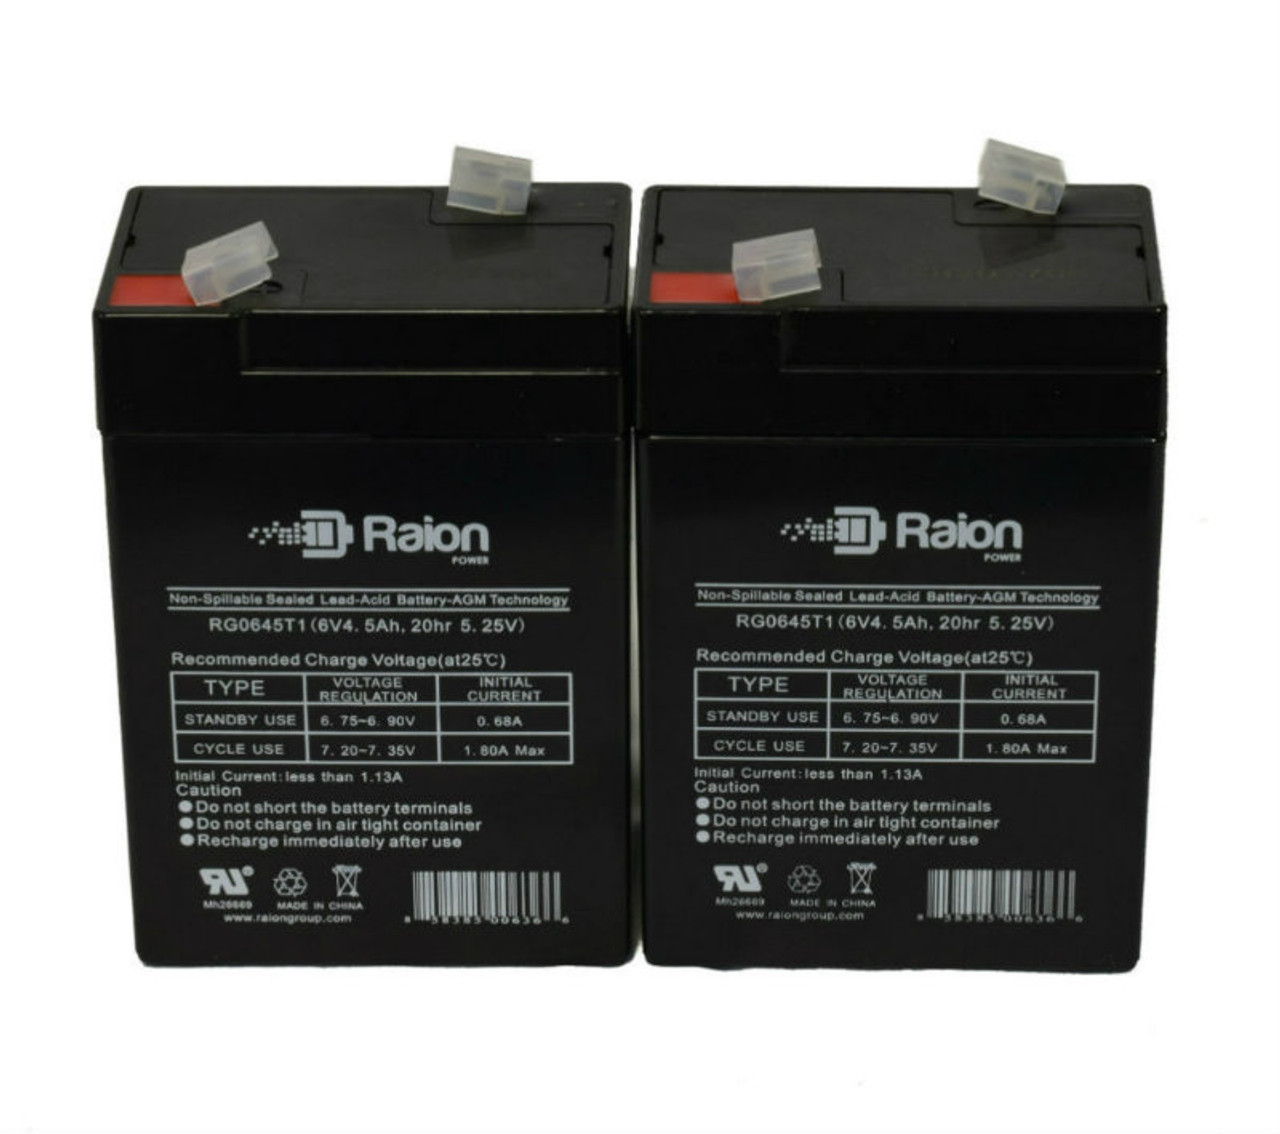 Raion Power RG0645T1 6V 4.5Ah Replacement Medical Equipment Battery for Nellcor NPB 195 - 2 Pack